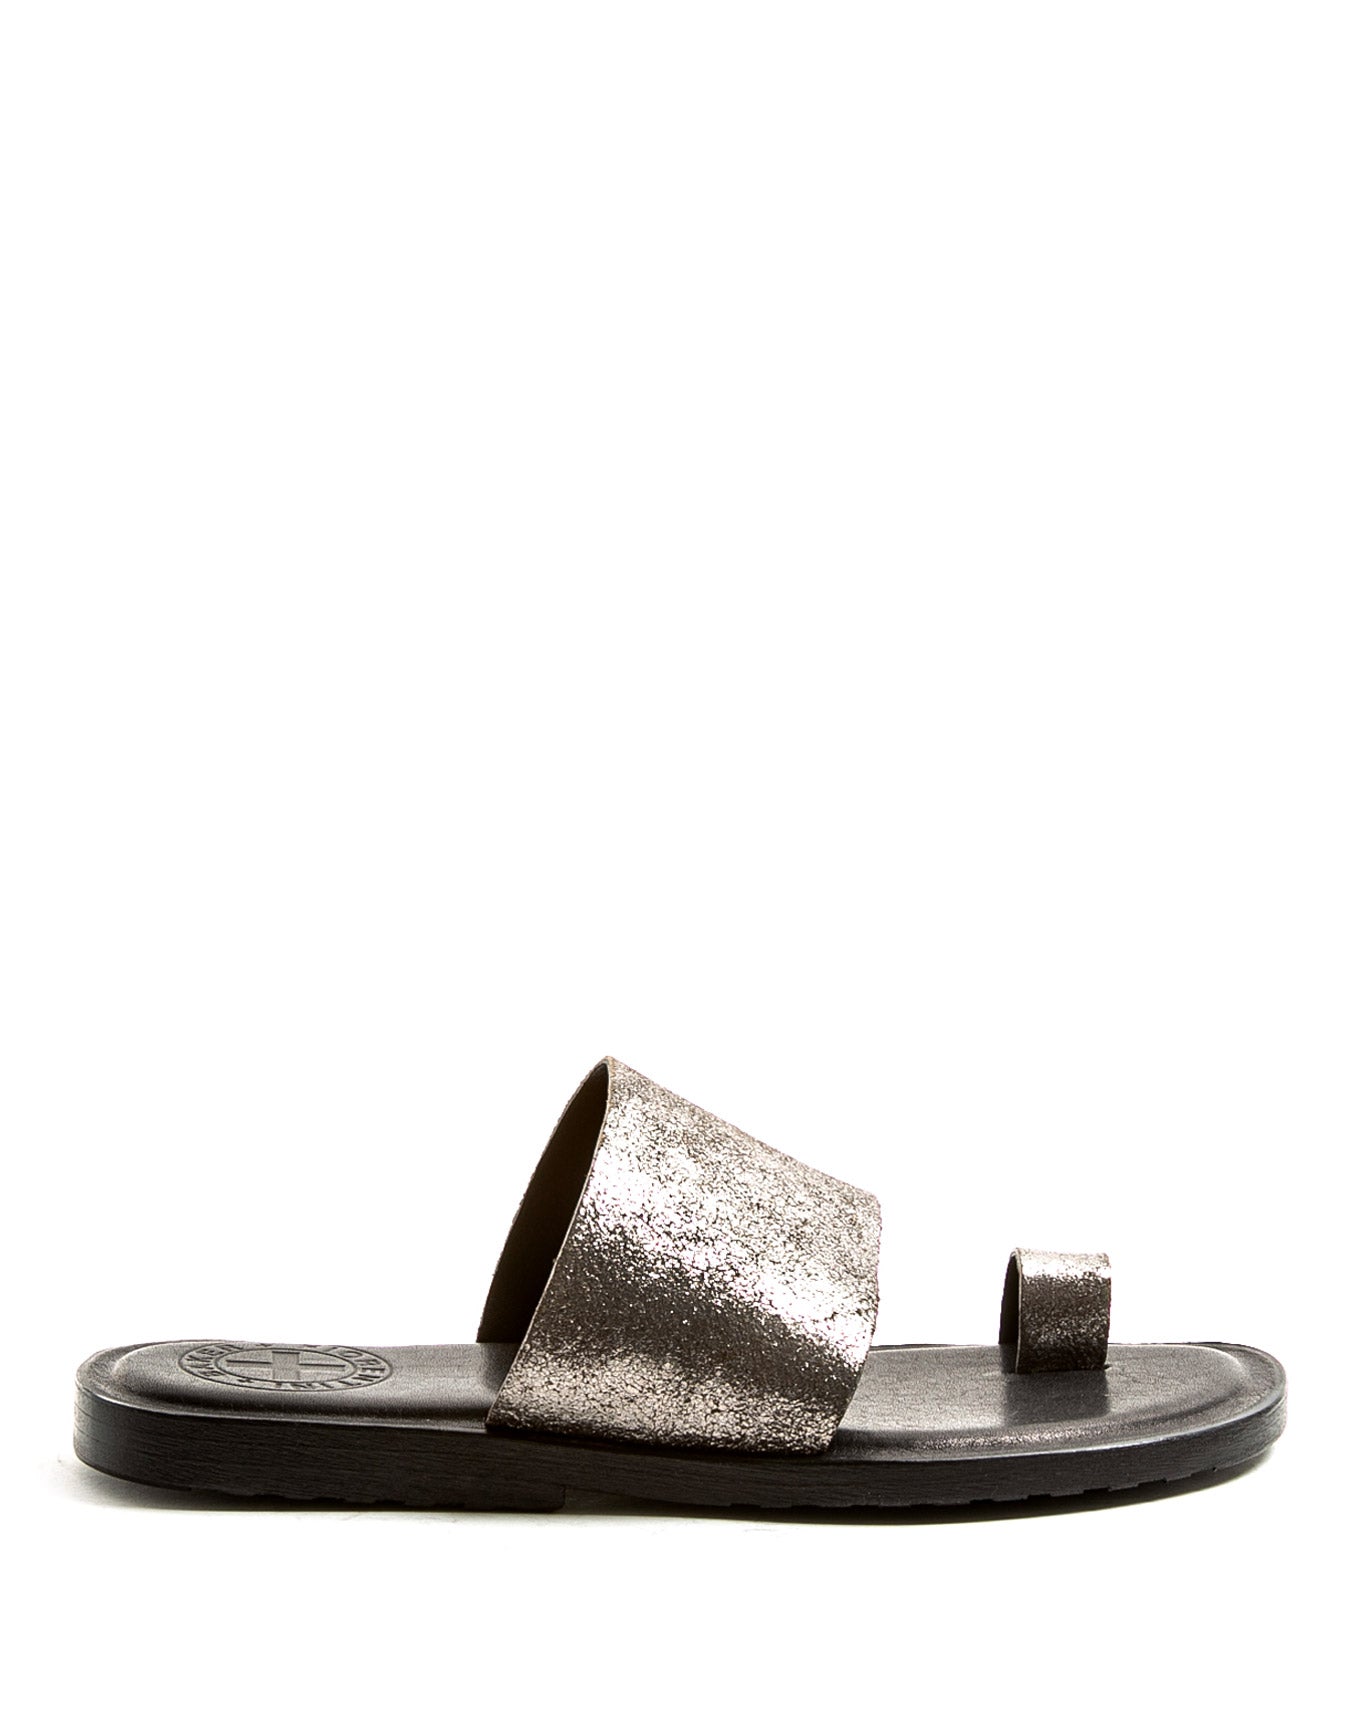 FIORENTINI + BAKER, ZANTE ZEN, Extremely comfortable and supple lined leather slip on sandal. Handcrafted by skilled artisans. Made in Italy. Made to last.